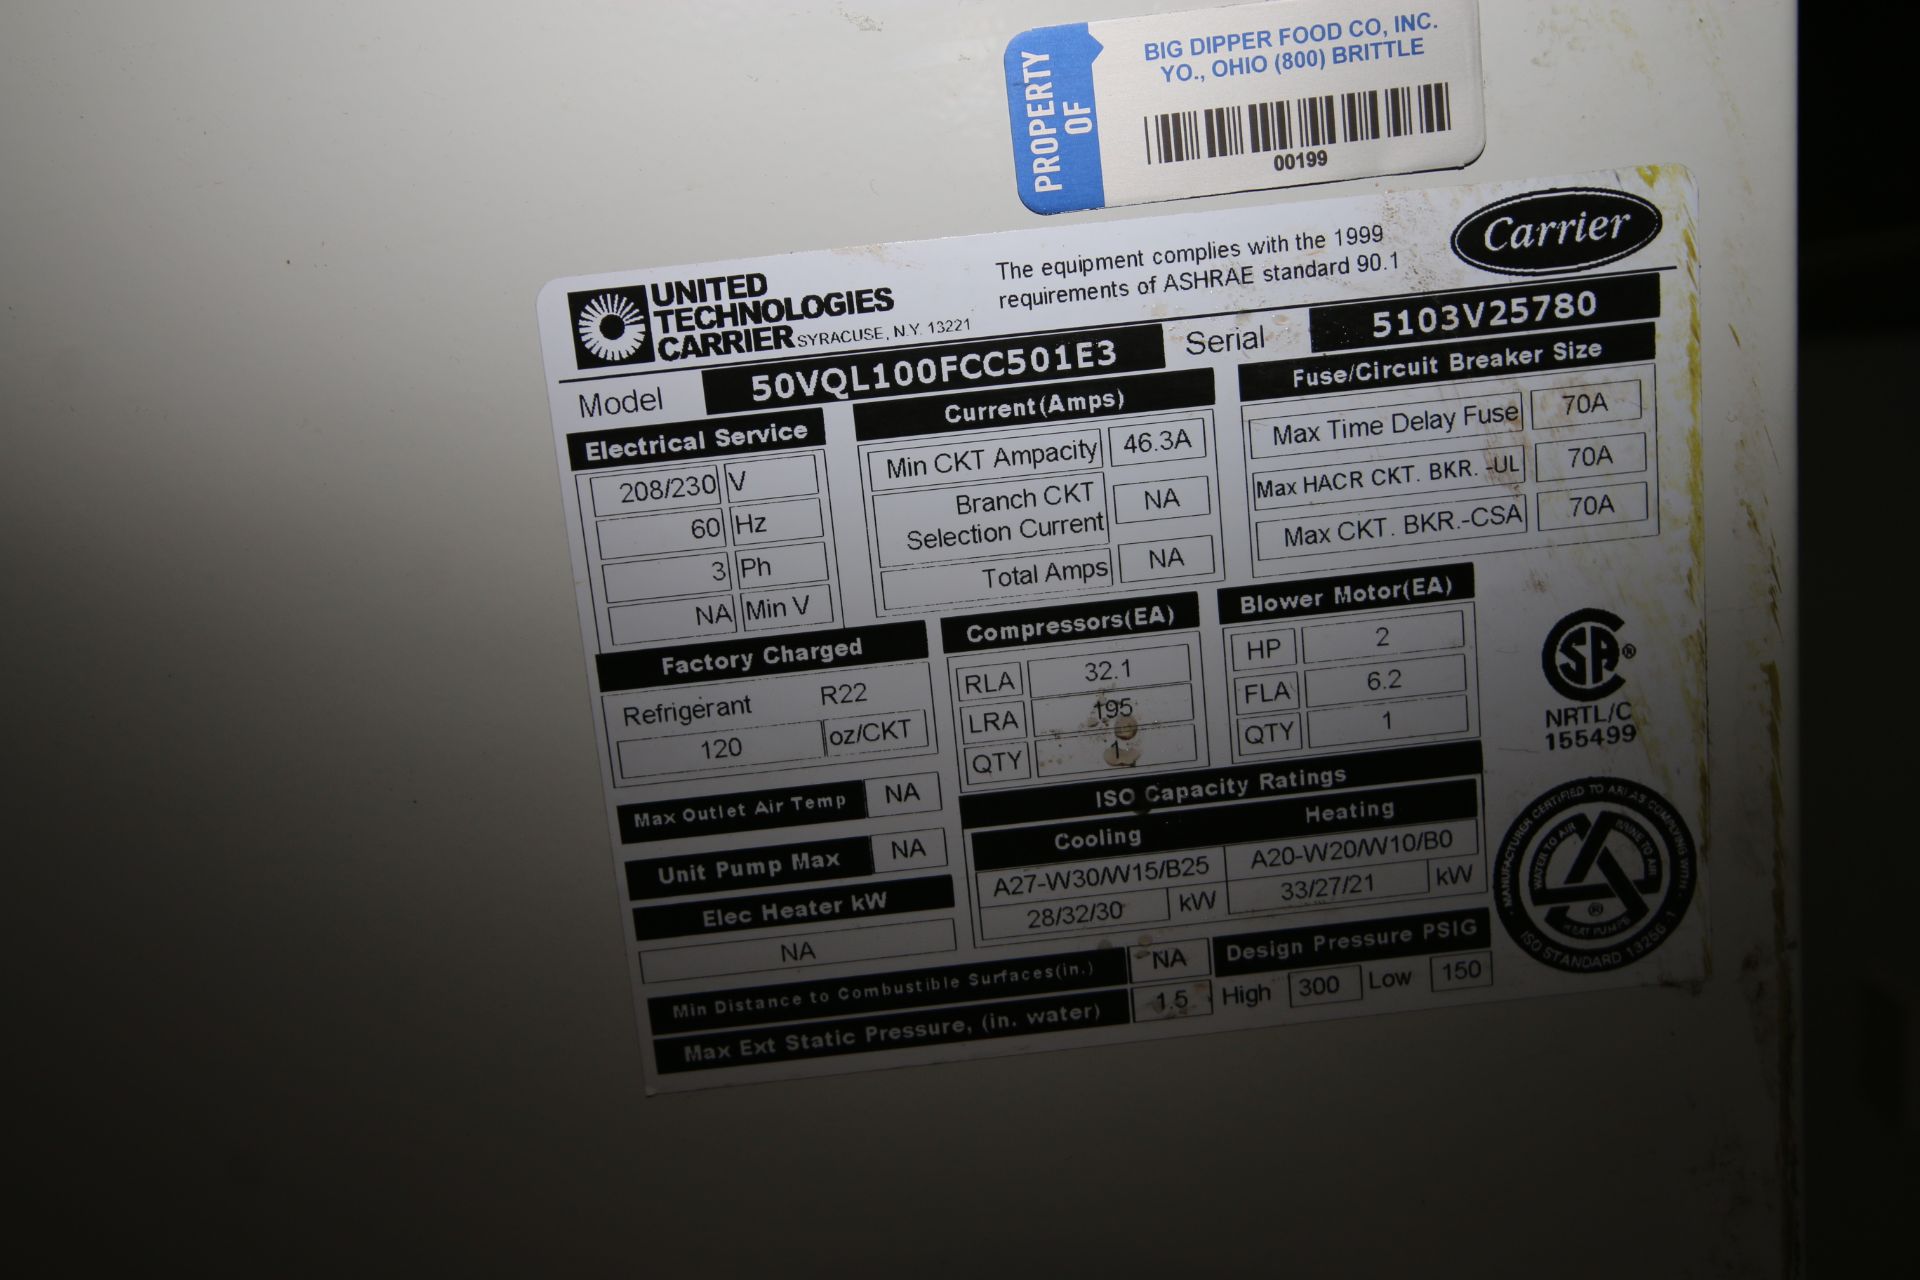 Carrier Air Conditioning Unit, M/N 50VQL100FCC501E3, S/N 5103V25780, 208/230 Volts (LOCATED IN - Image 2 of 2